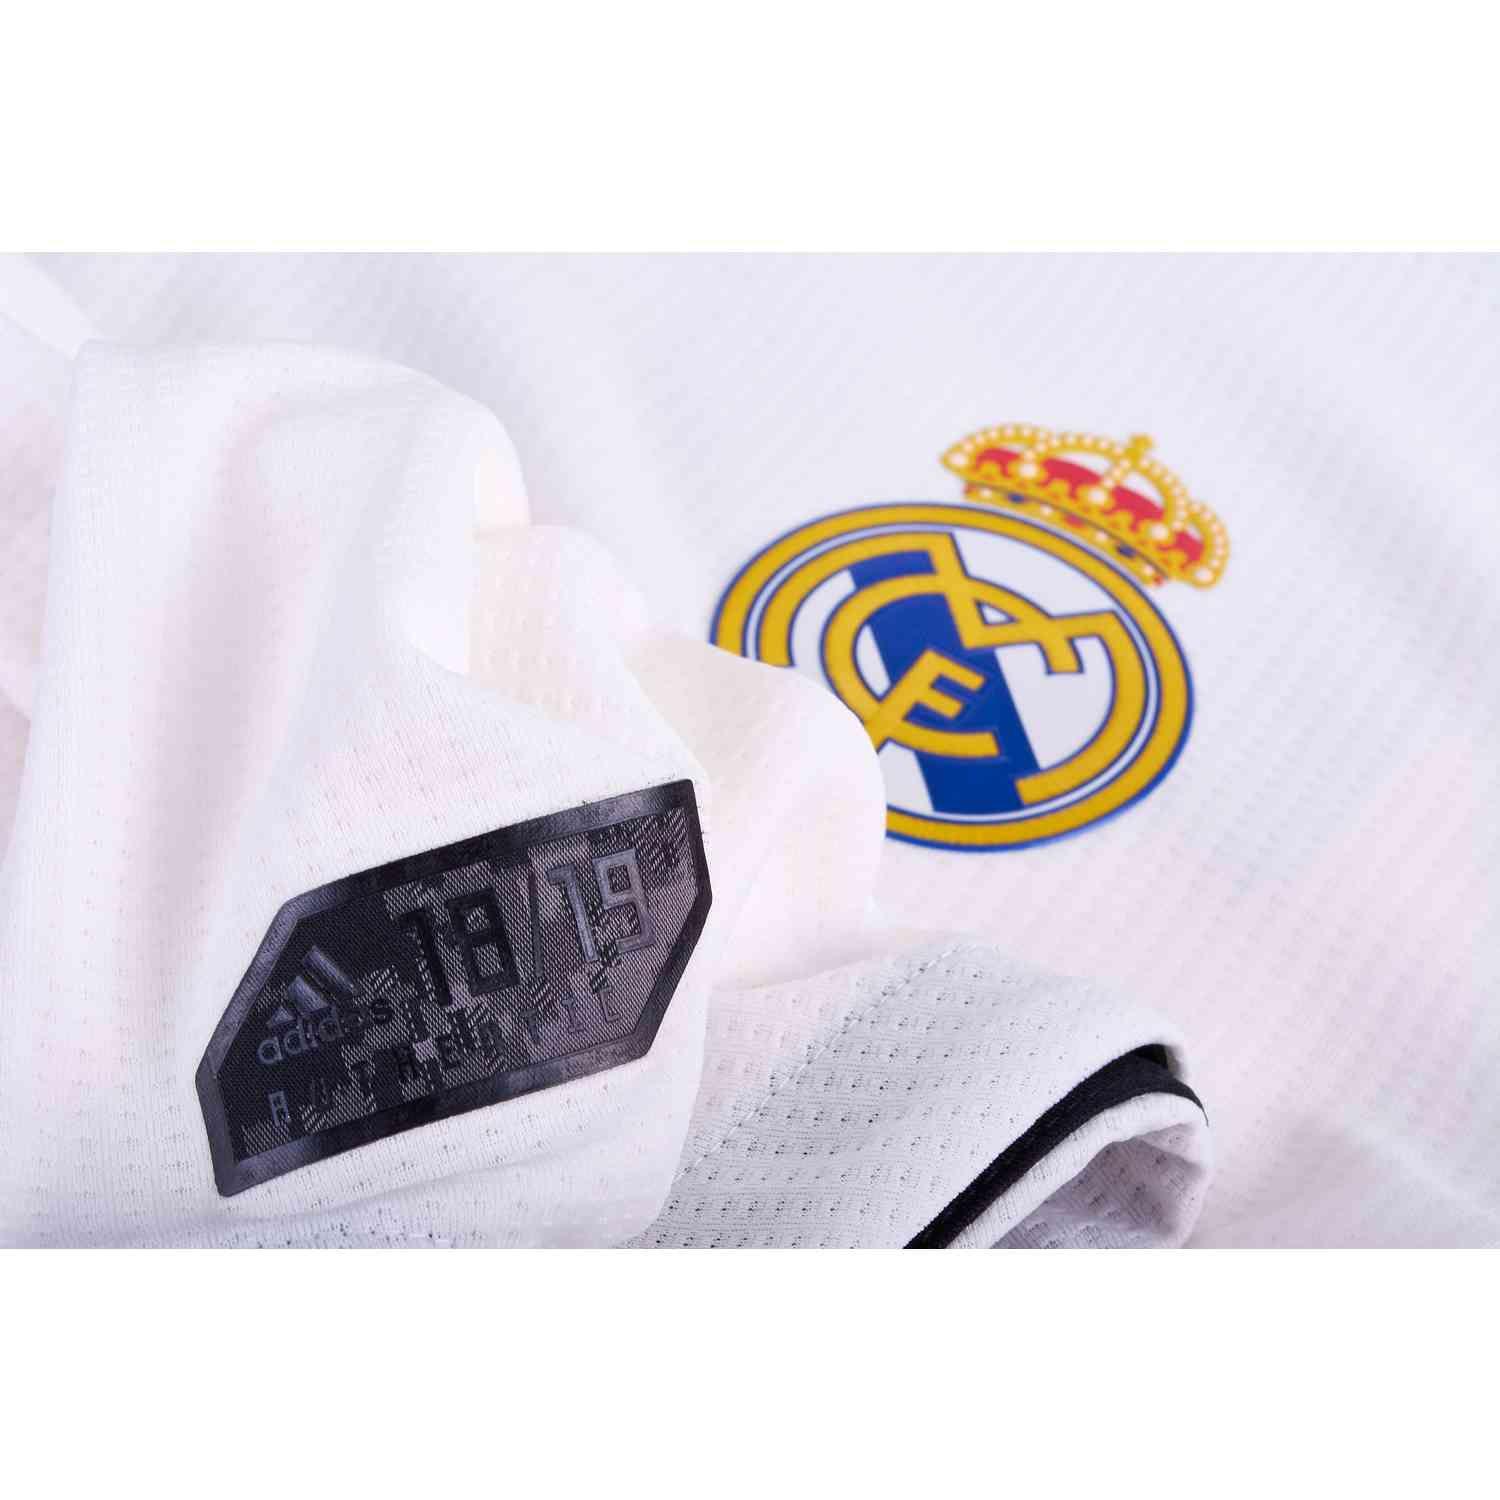 Adidas Real Madrid Logo - Adidas Real Madrid Home Authentic L S Jersey 2018 19